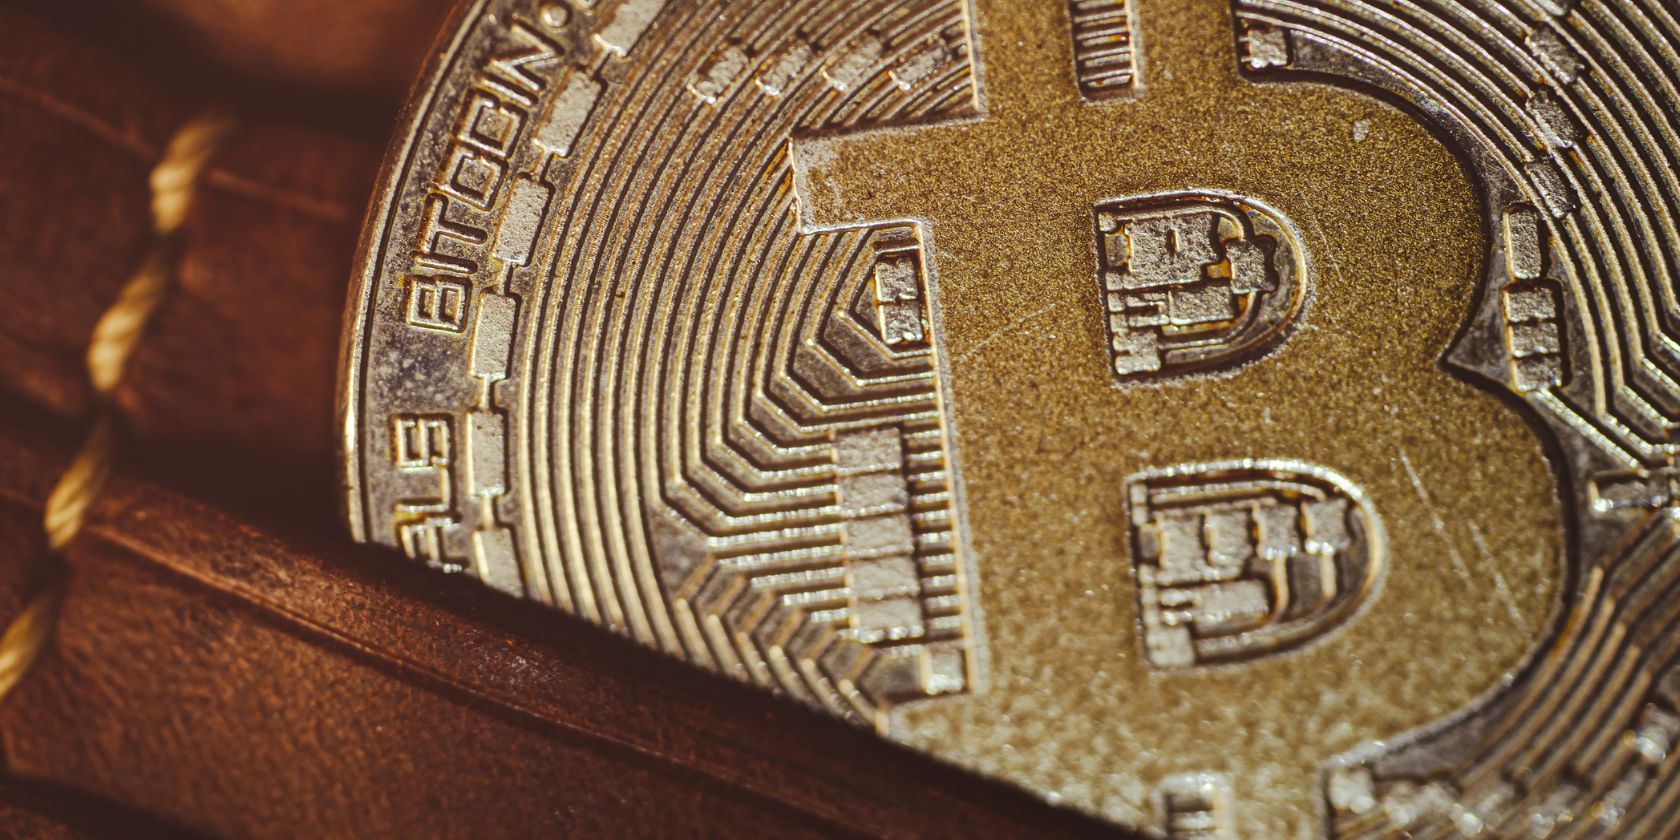 close up shot of bitcoin crypto coin in brown leather wallet